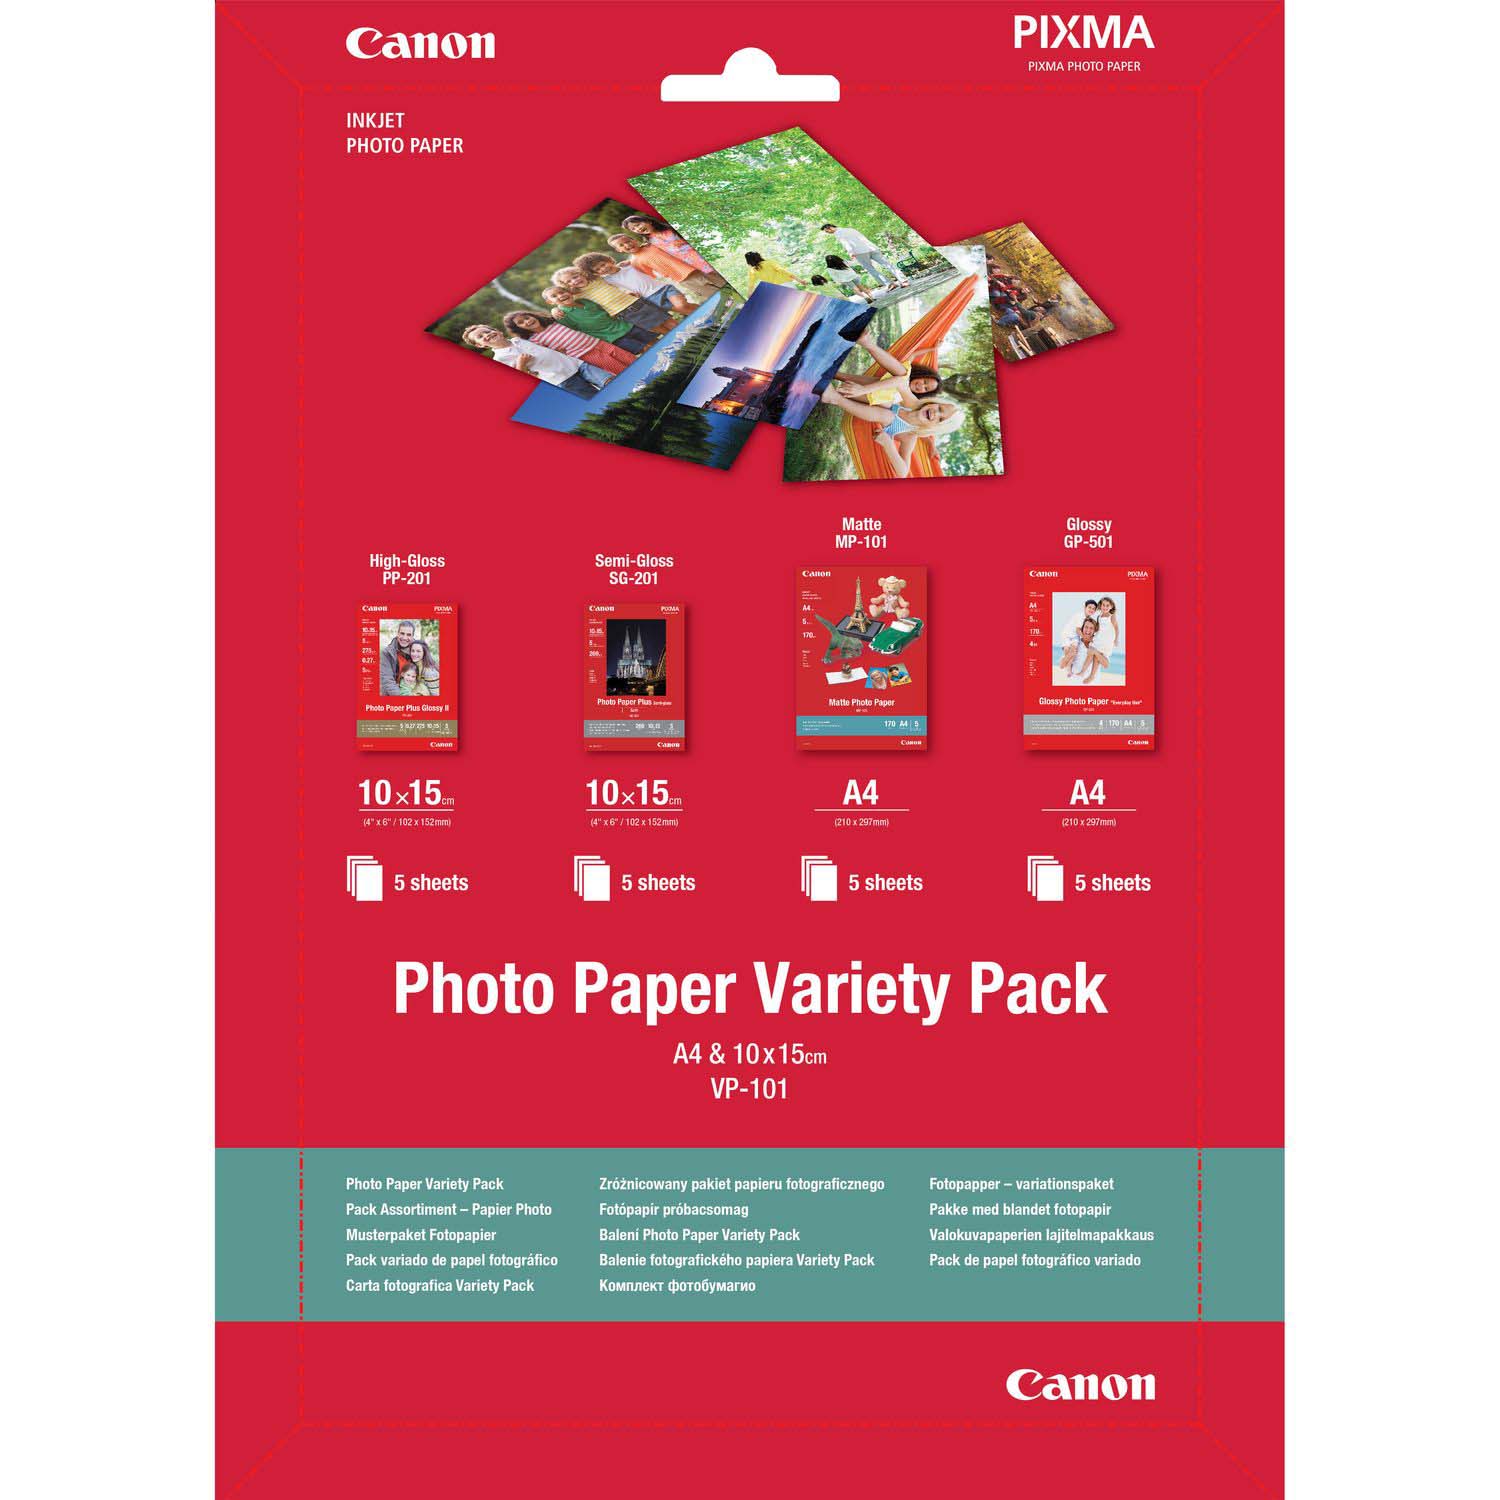 PAPEL CANON PHOTO VARIETY PACK VP-101 A4 & 10X15 CANON 